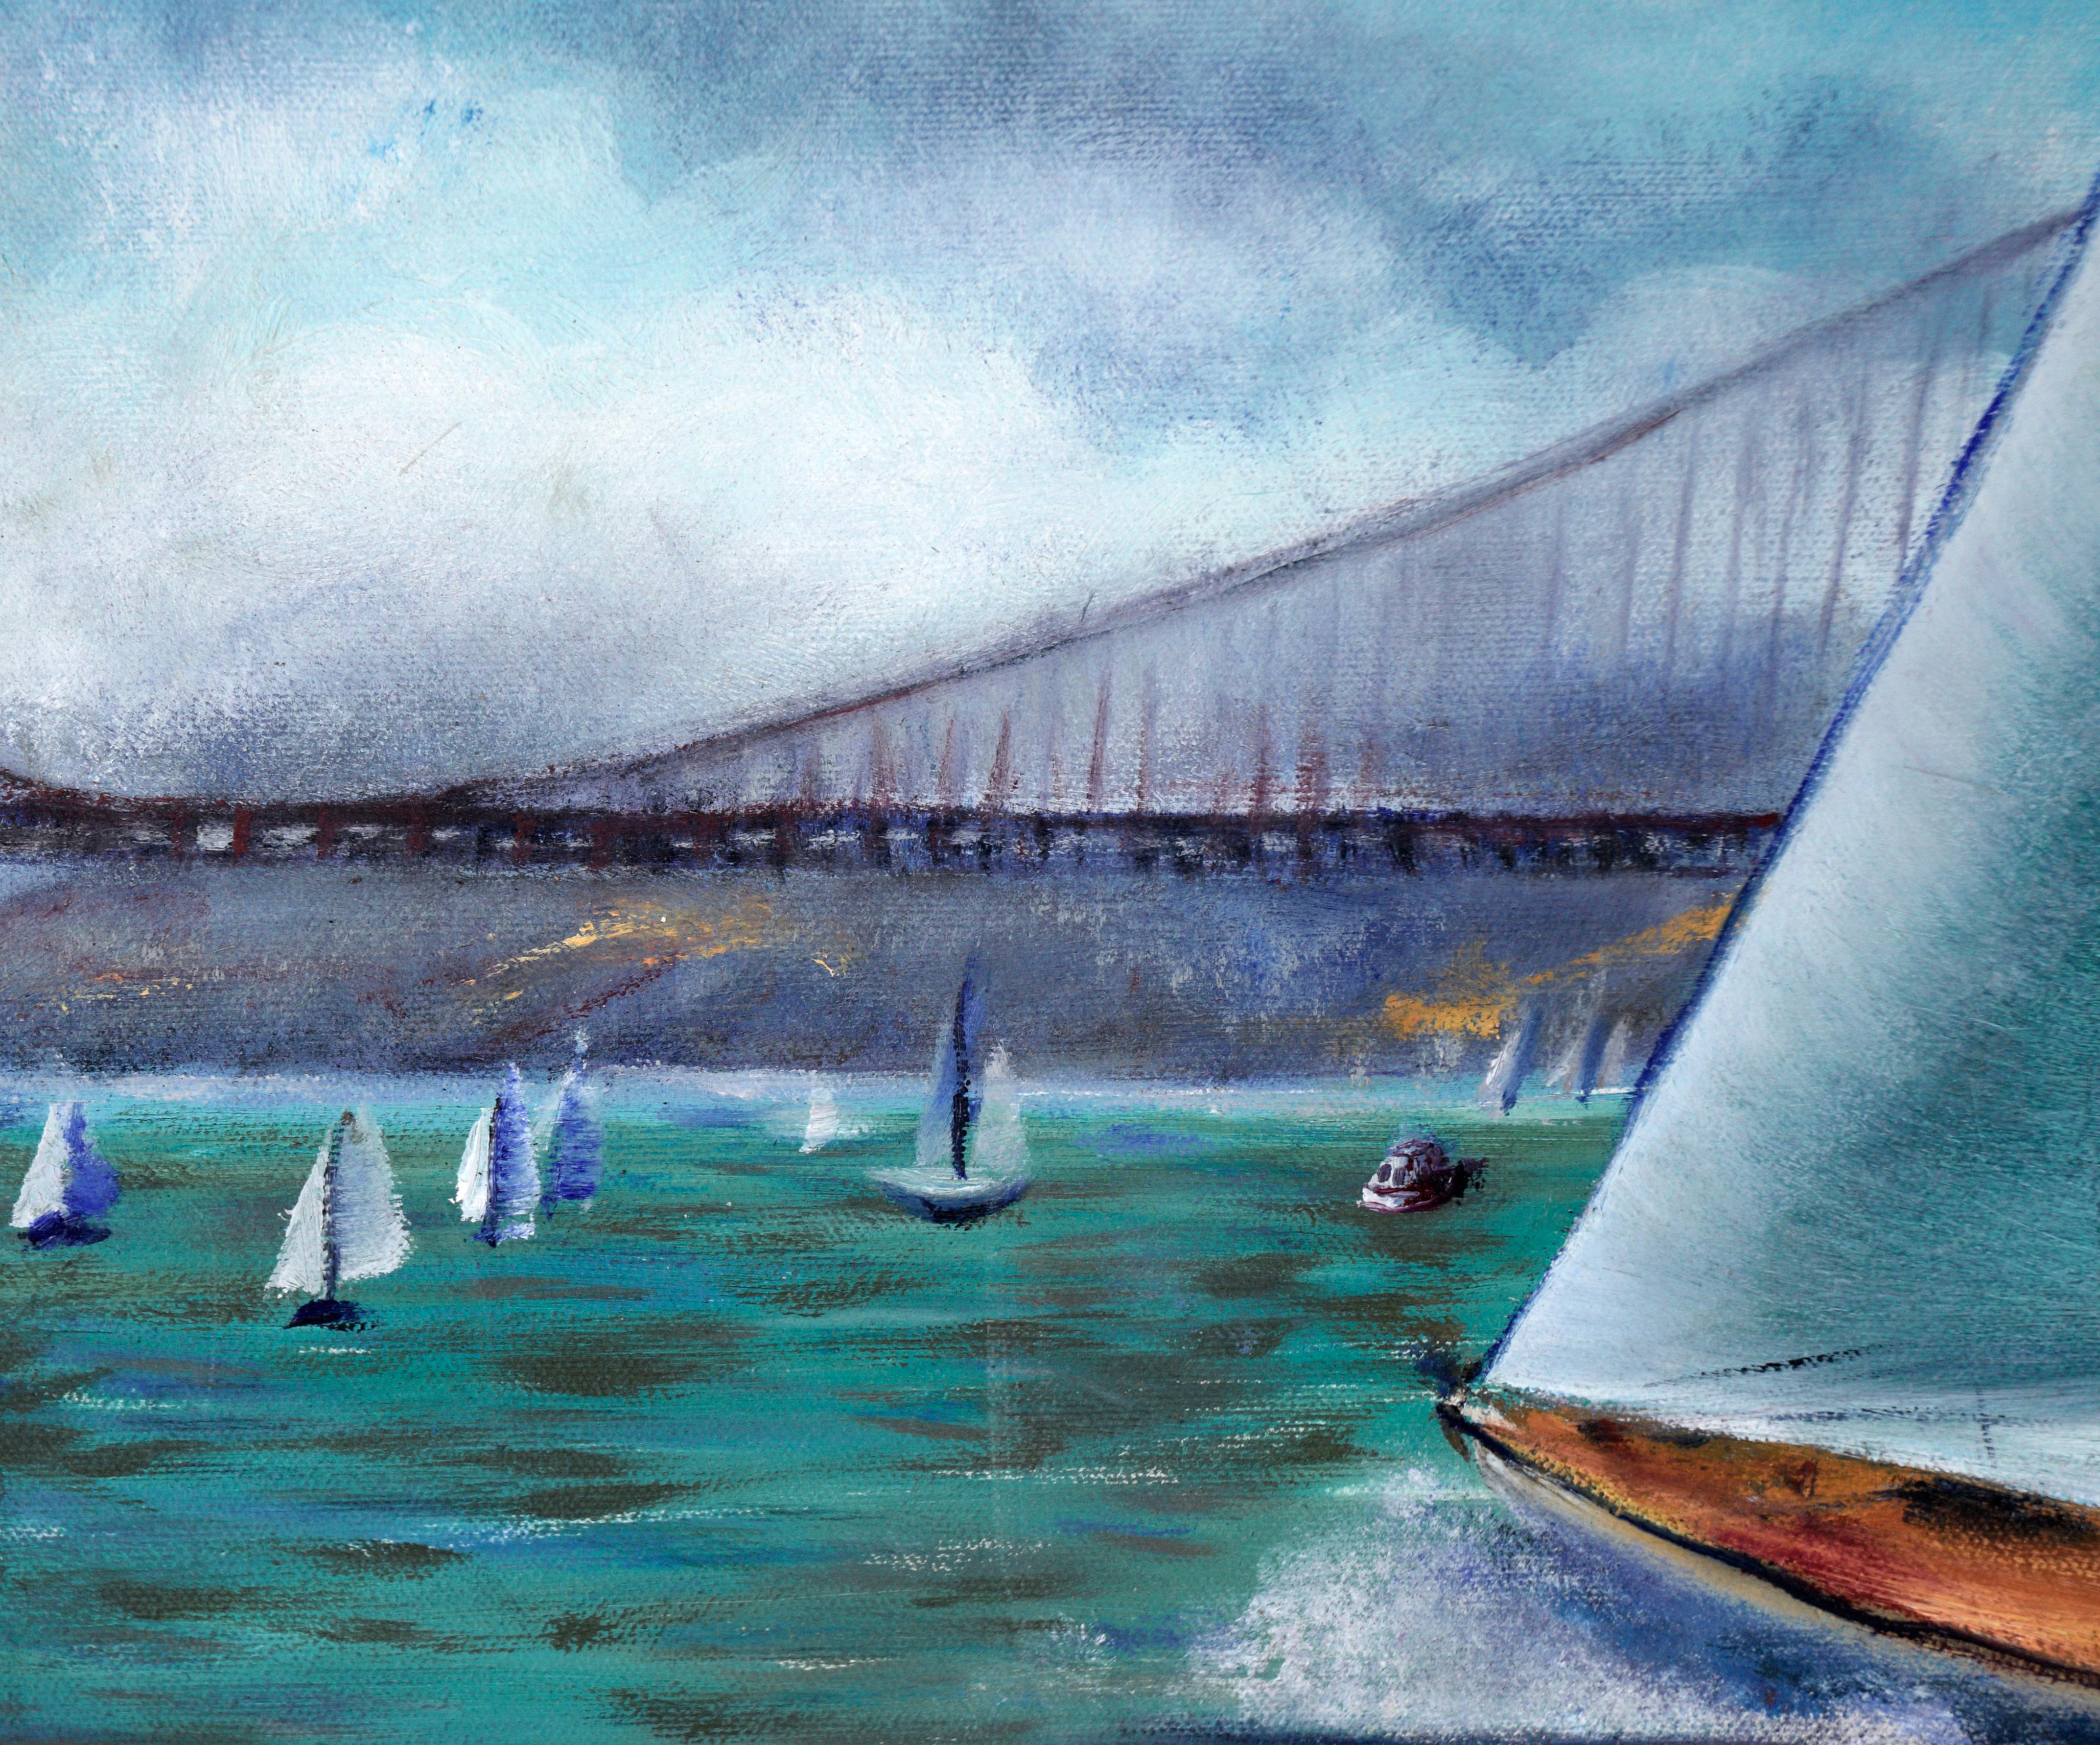 Sailing Regatta Under the Golden Gate Bridge - Seascape in Oil on Canvas

Colorful depiction of sailboats in San Francisco Bay by unknown artist 